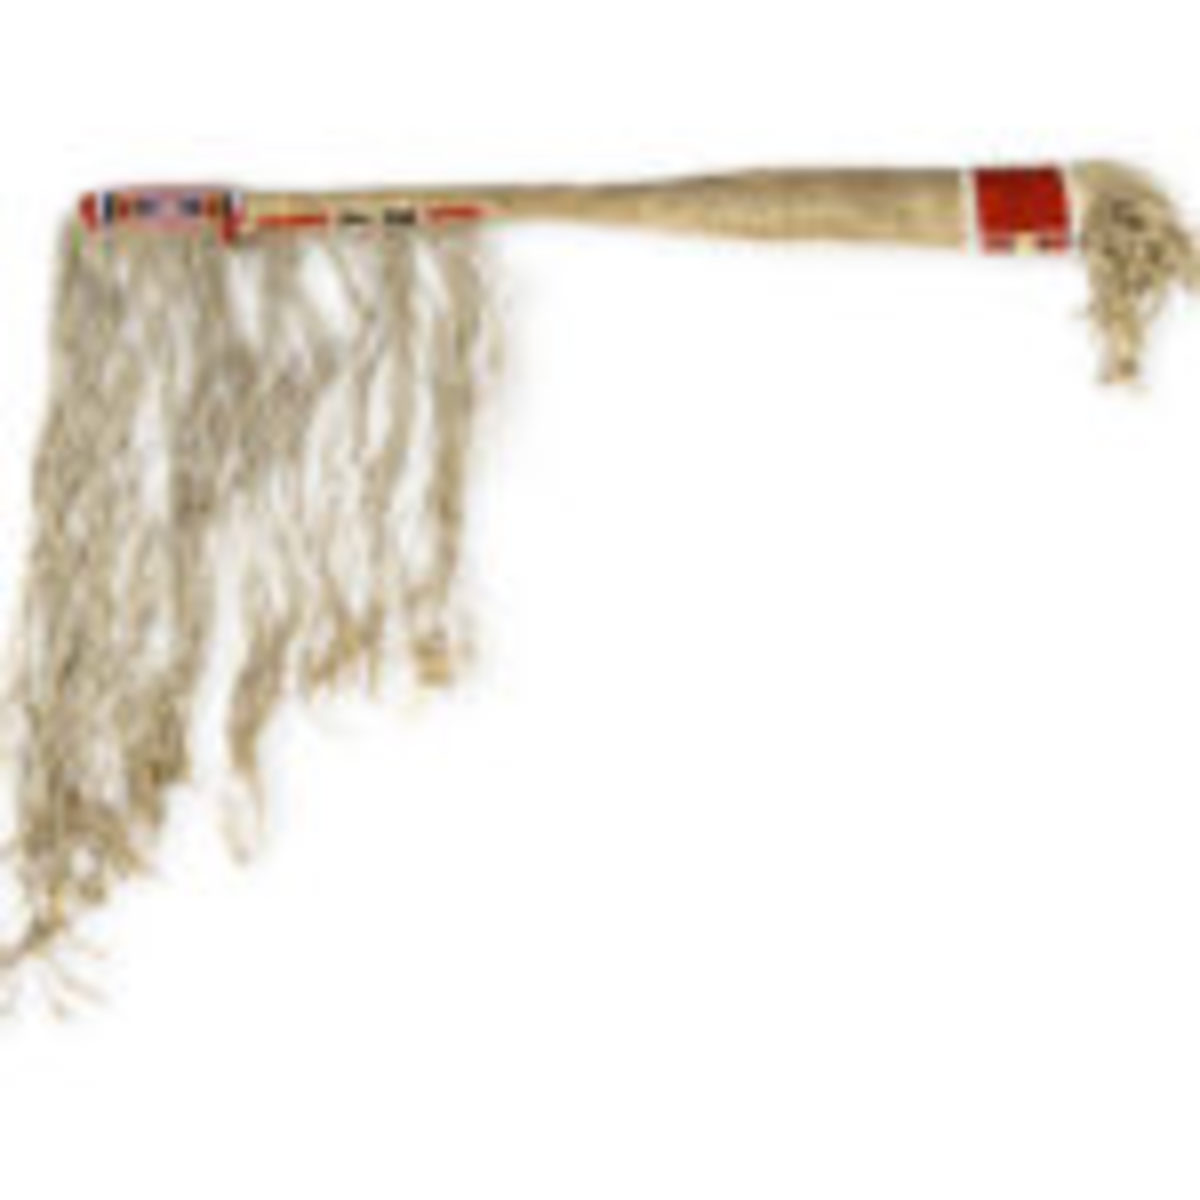 Northern Plains/Crow buffalo hide rifle scabbard with seed and pony beads, body and fringe buffalo hide.